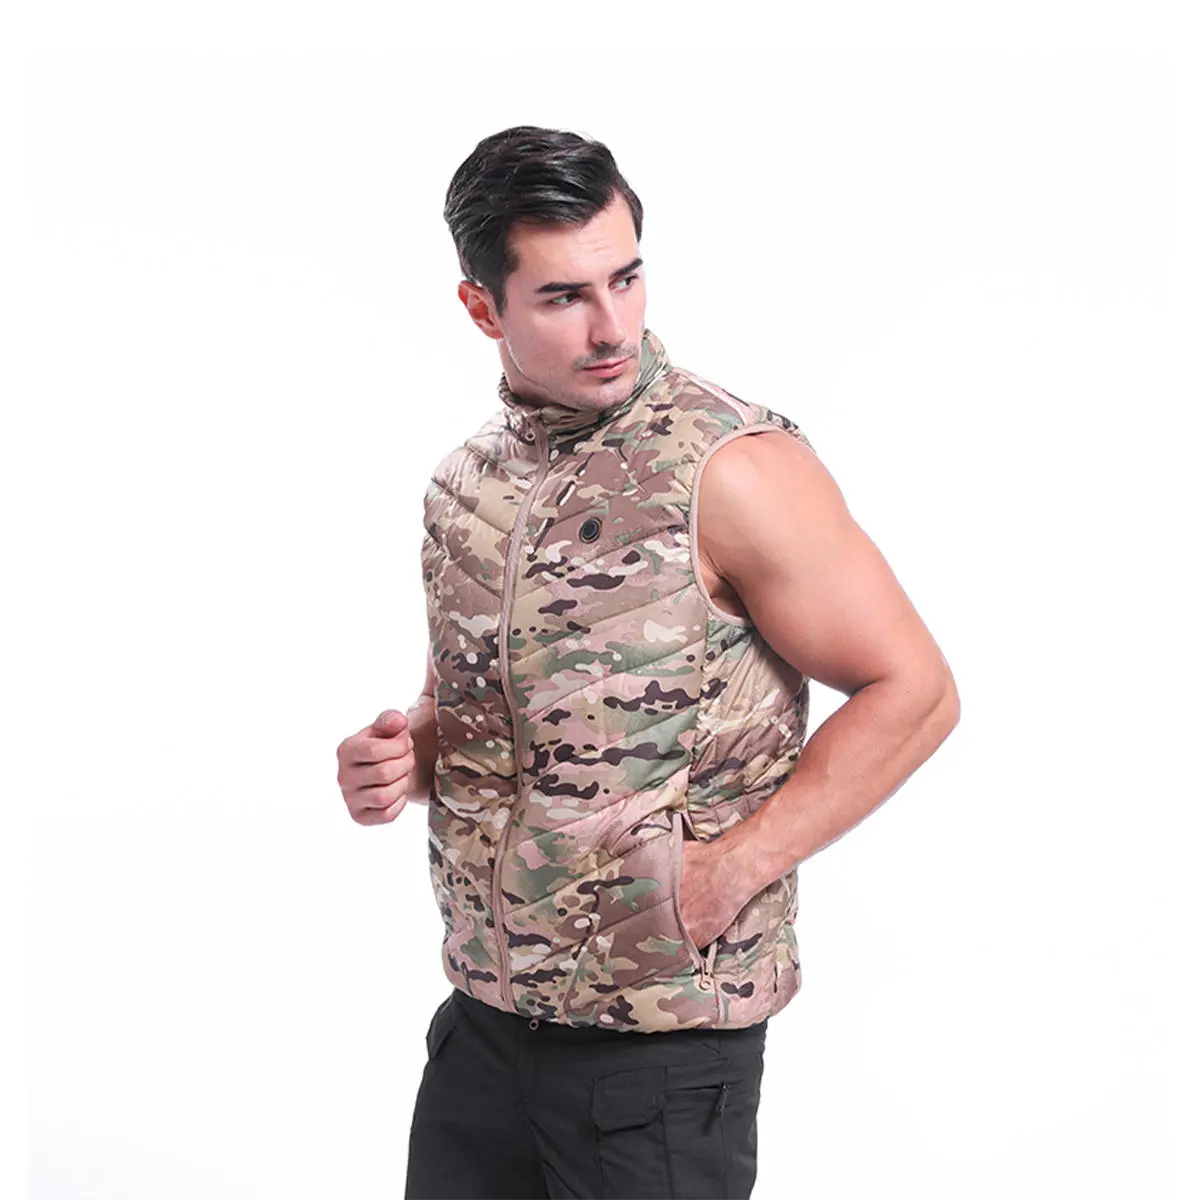 Usb security three-speed thermostat electric vest camouflage outdoor sports warm